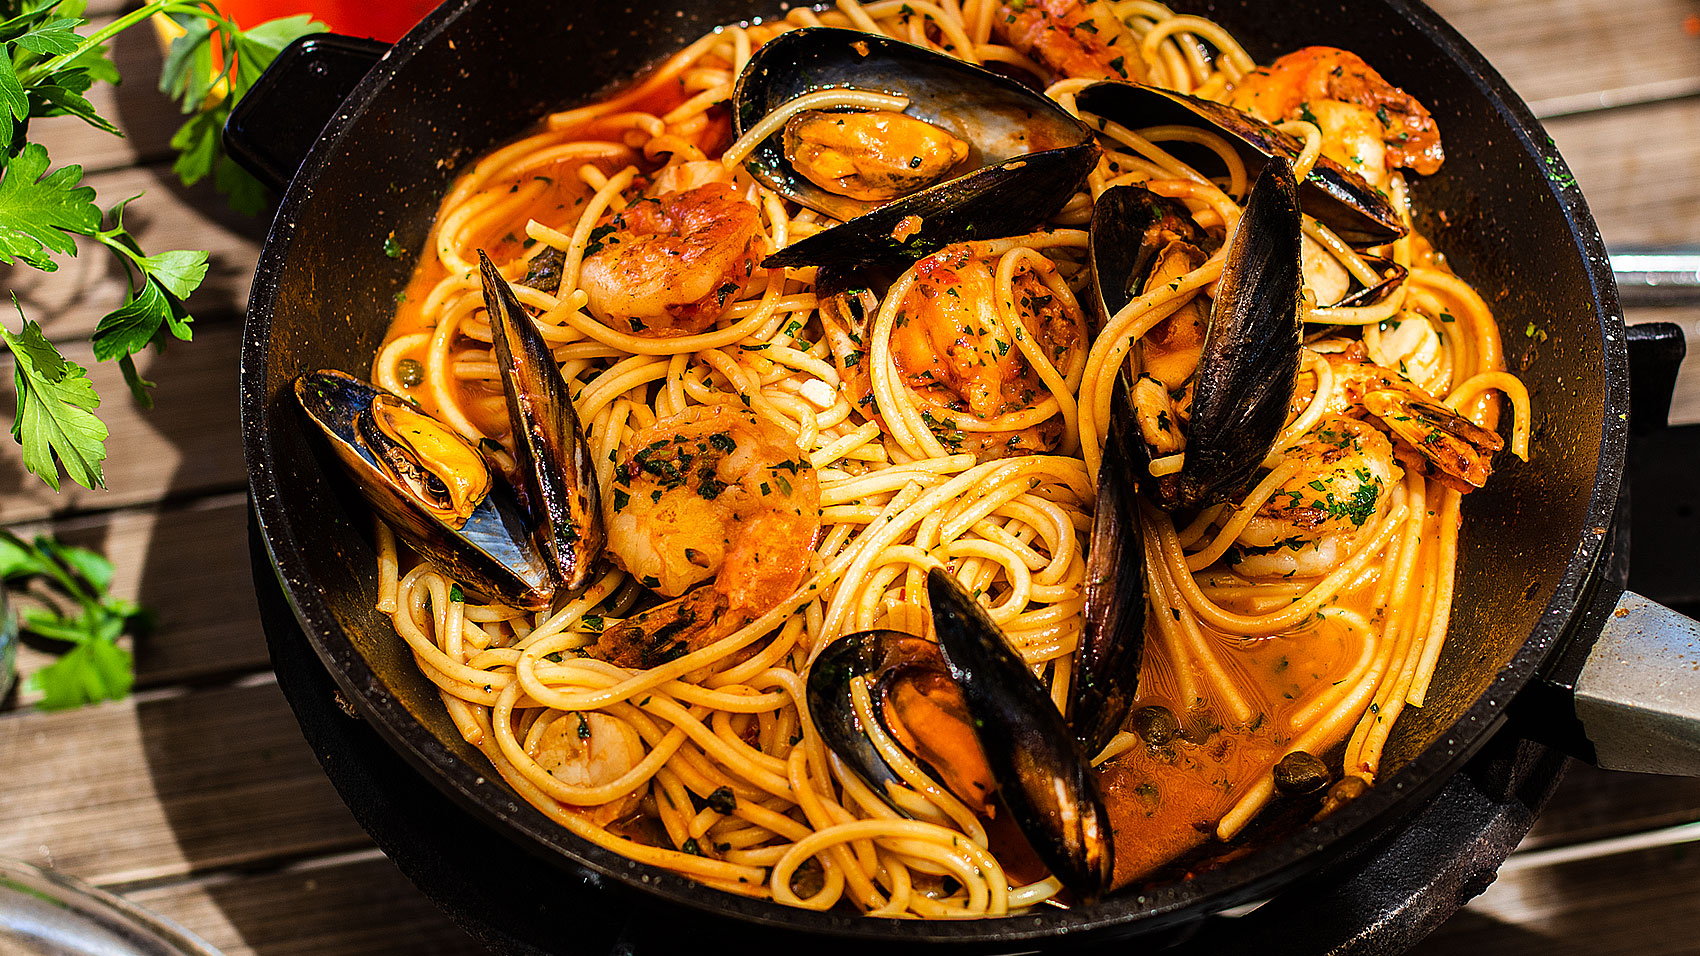 Seafood spaghetti marinara - Easy Meals with Video Recipes by Chef Joel